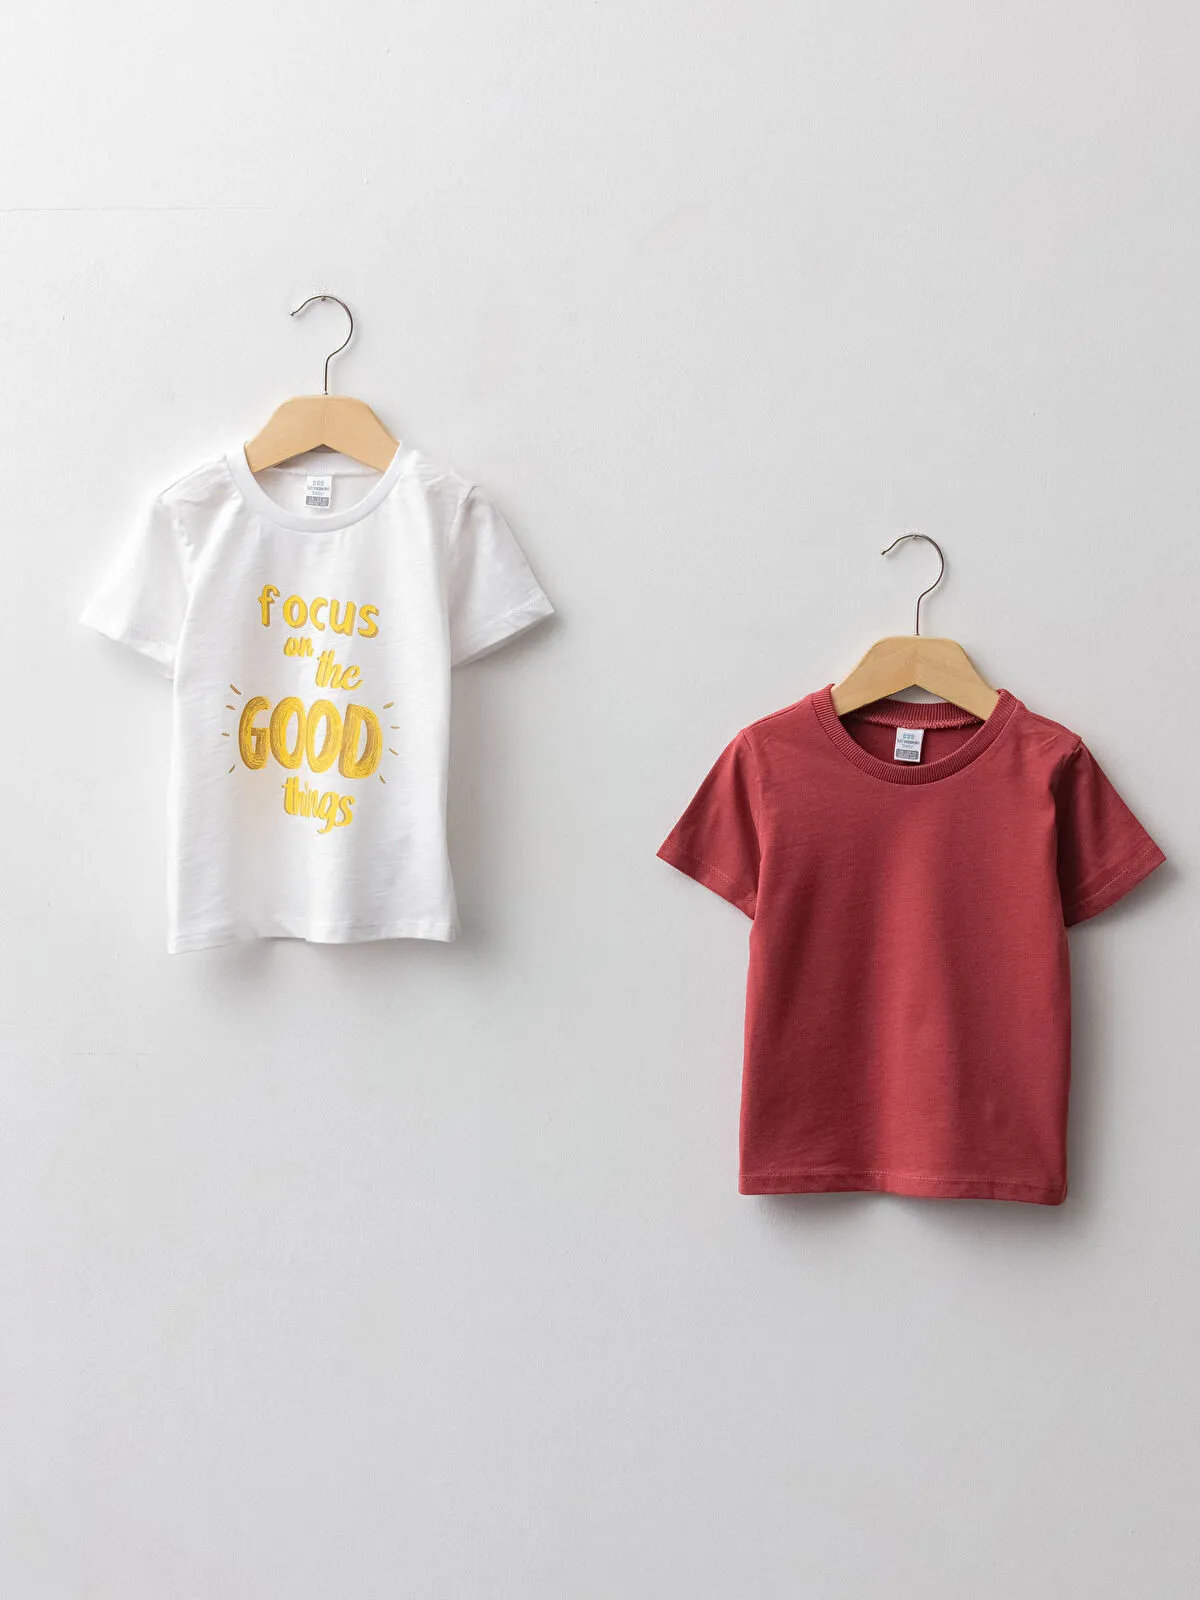 LC WAIKIKI Pack of 2 T-shirts- Focus on the Good Things